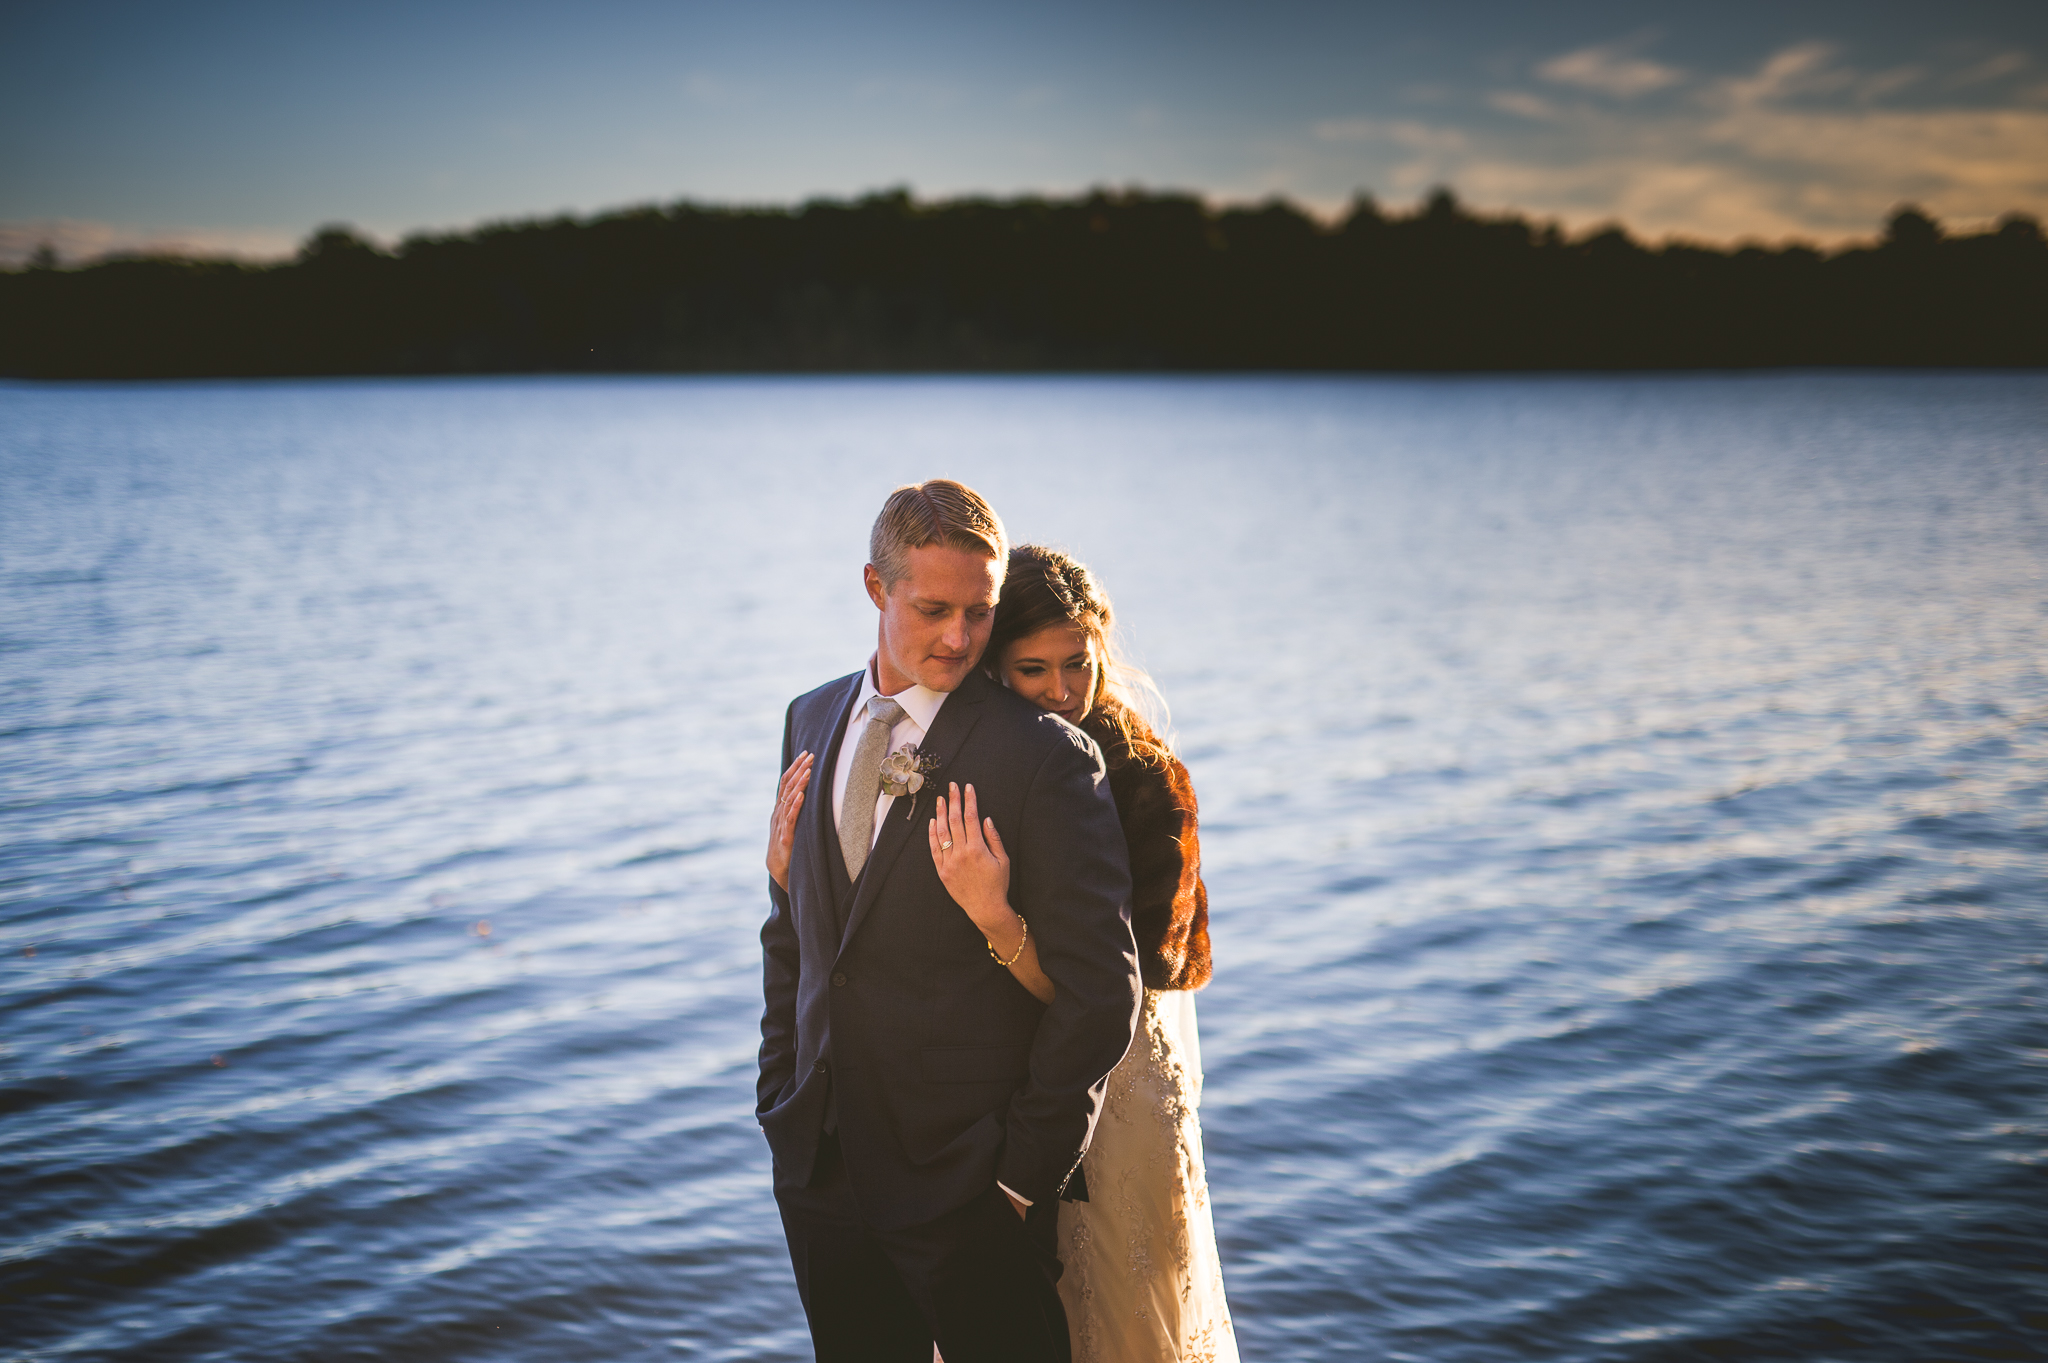 Mandy + Mike // Amazing Wedding at Stout’s Island Wisconsin Preview